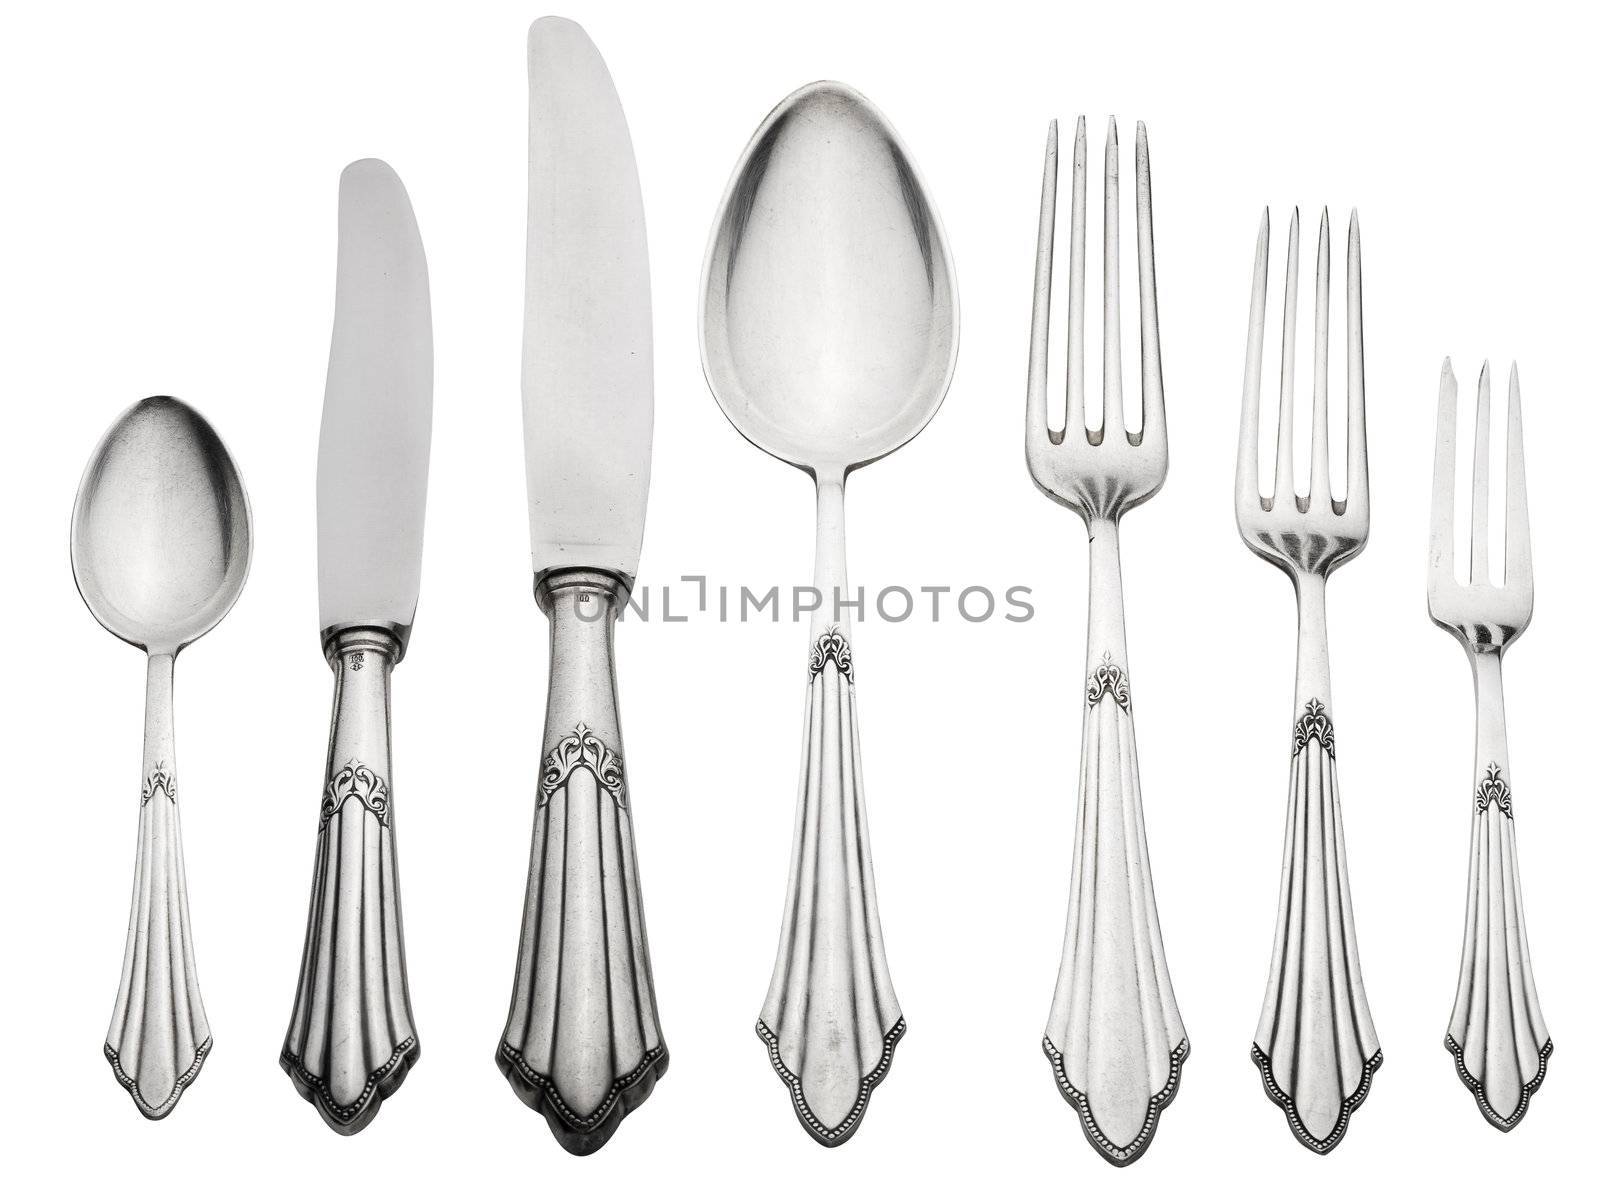 Old Silverware Set (Clipping Path)